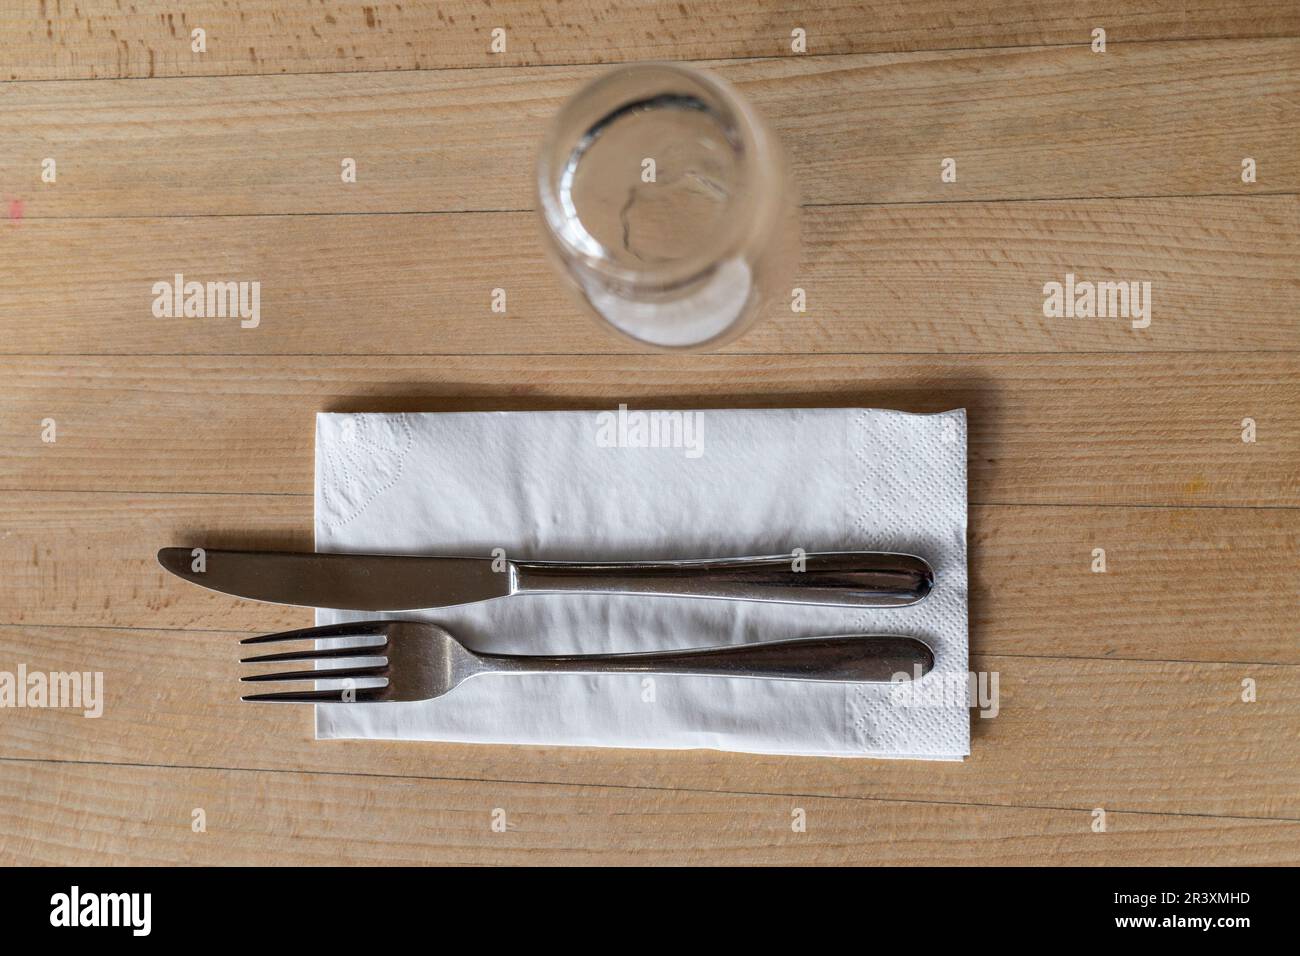 A knife and fork placed on a paper napkin serviette on a table. Stock Photo